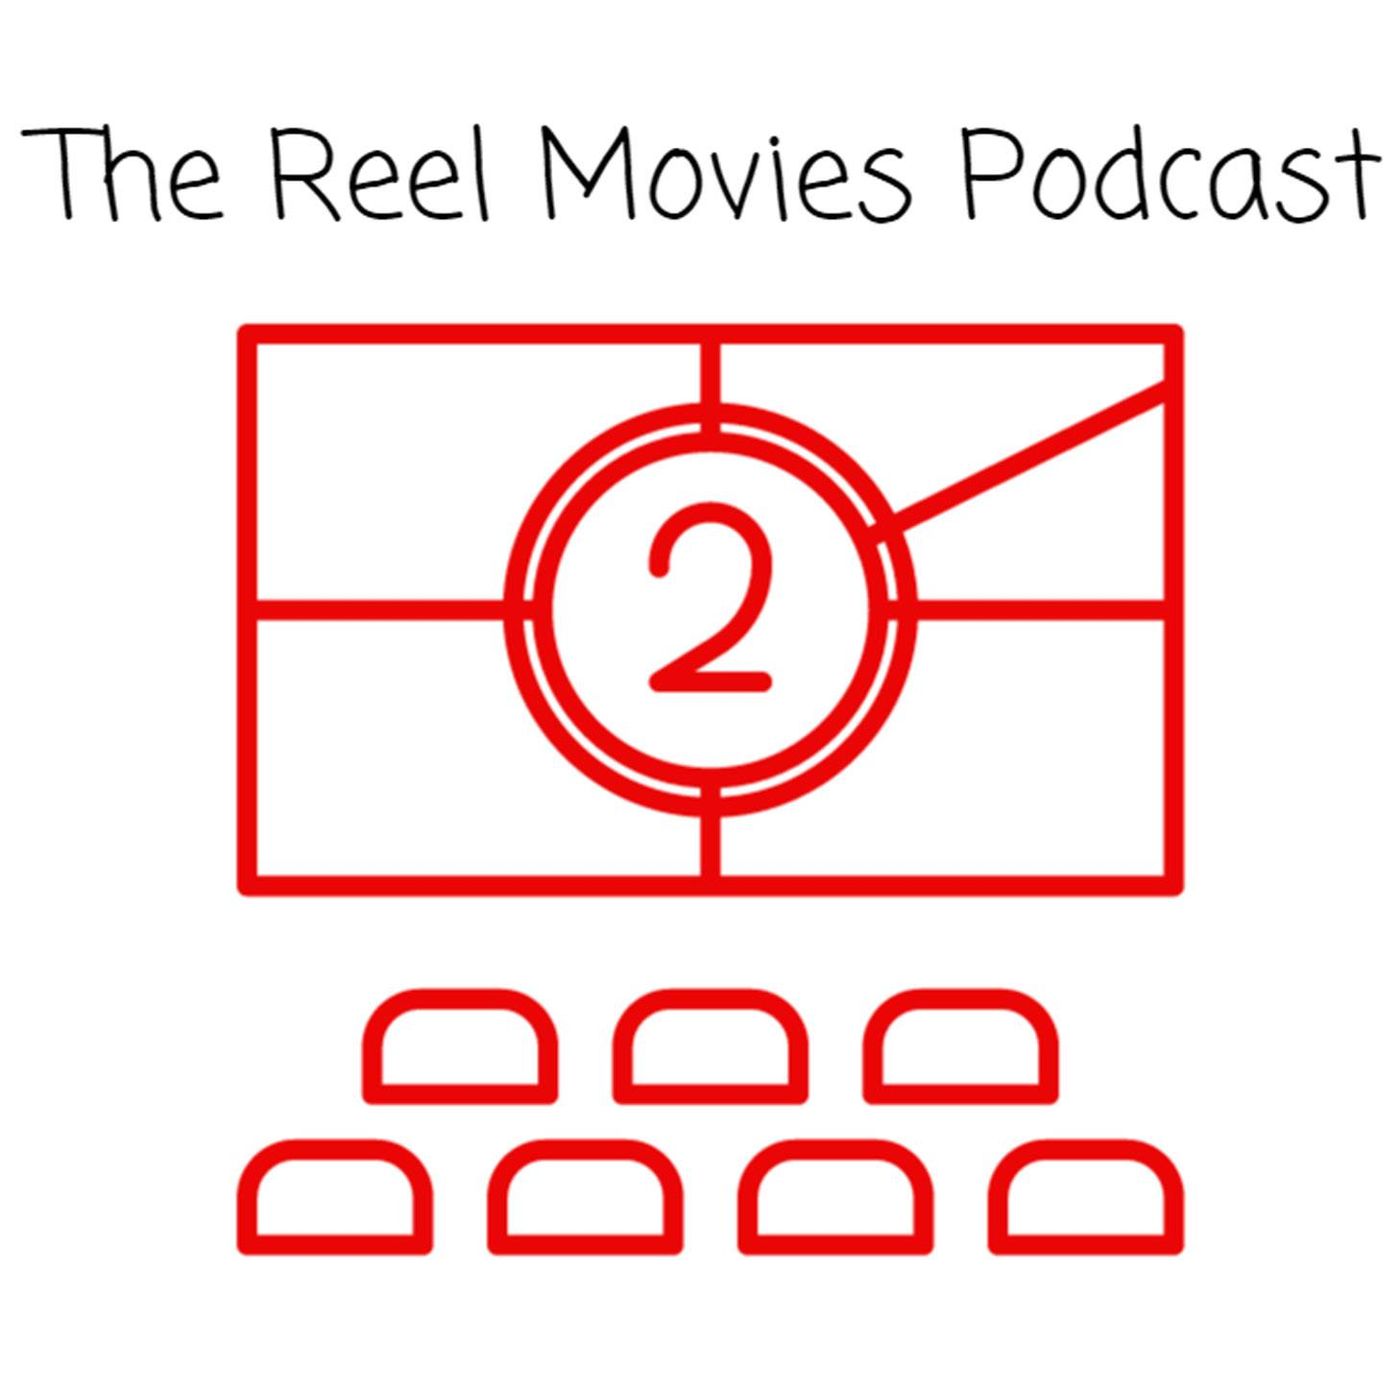 The Reel Movies Podcast